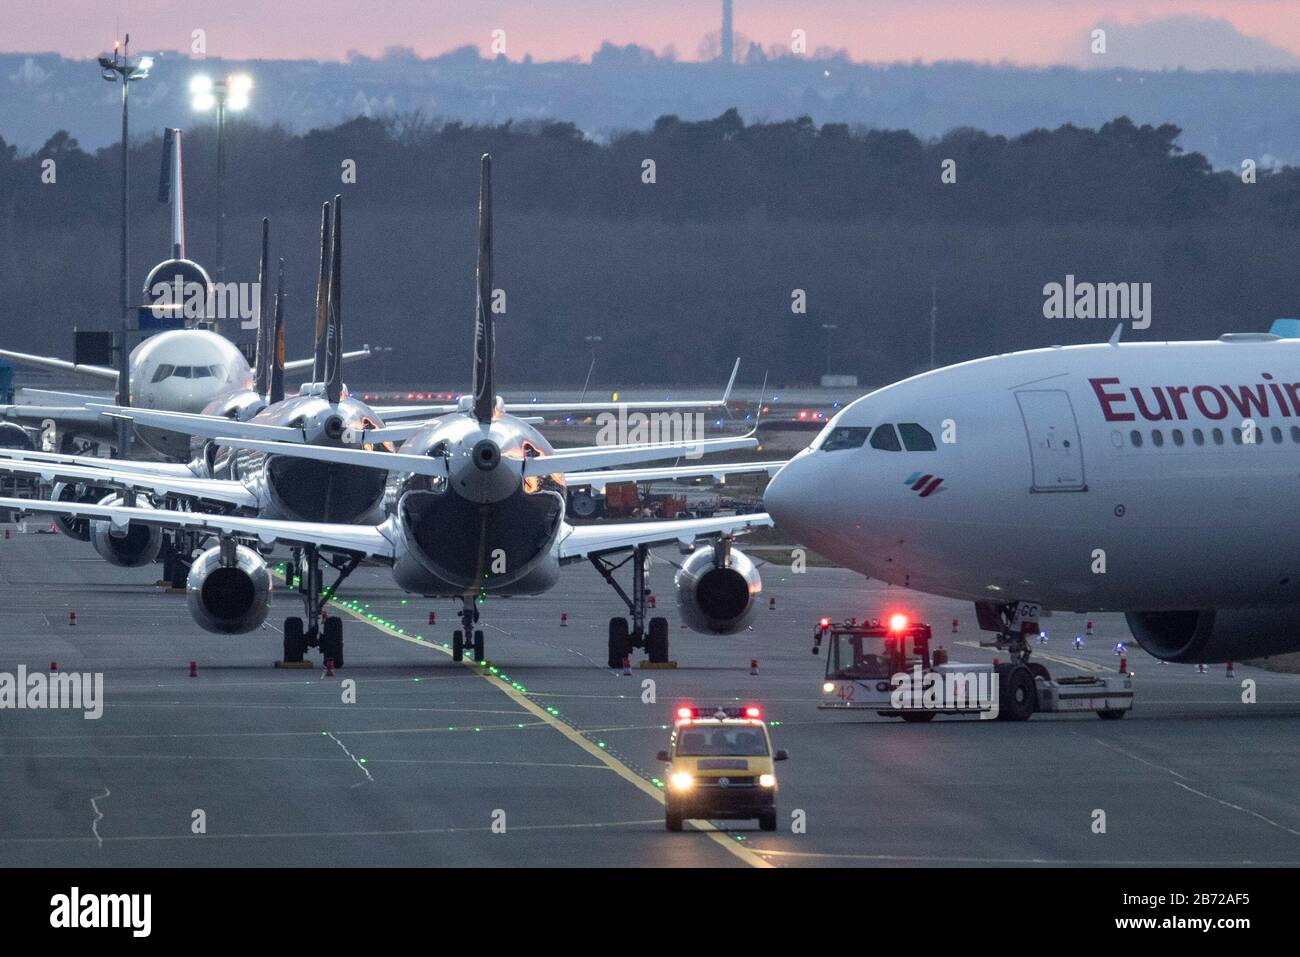 12 March 2020, Hessen, Frankfurt/Main: A passenger plane on the tarmac of Frankfurt airport. As of Saturday, Europeans are banned from entering the USA. The aviation industry is also affected by the travel restrictions resulting from the corona pandemic. Photo: Boris Roessler/dpa Stock Photo